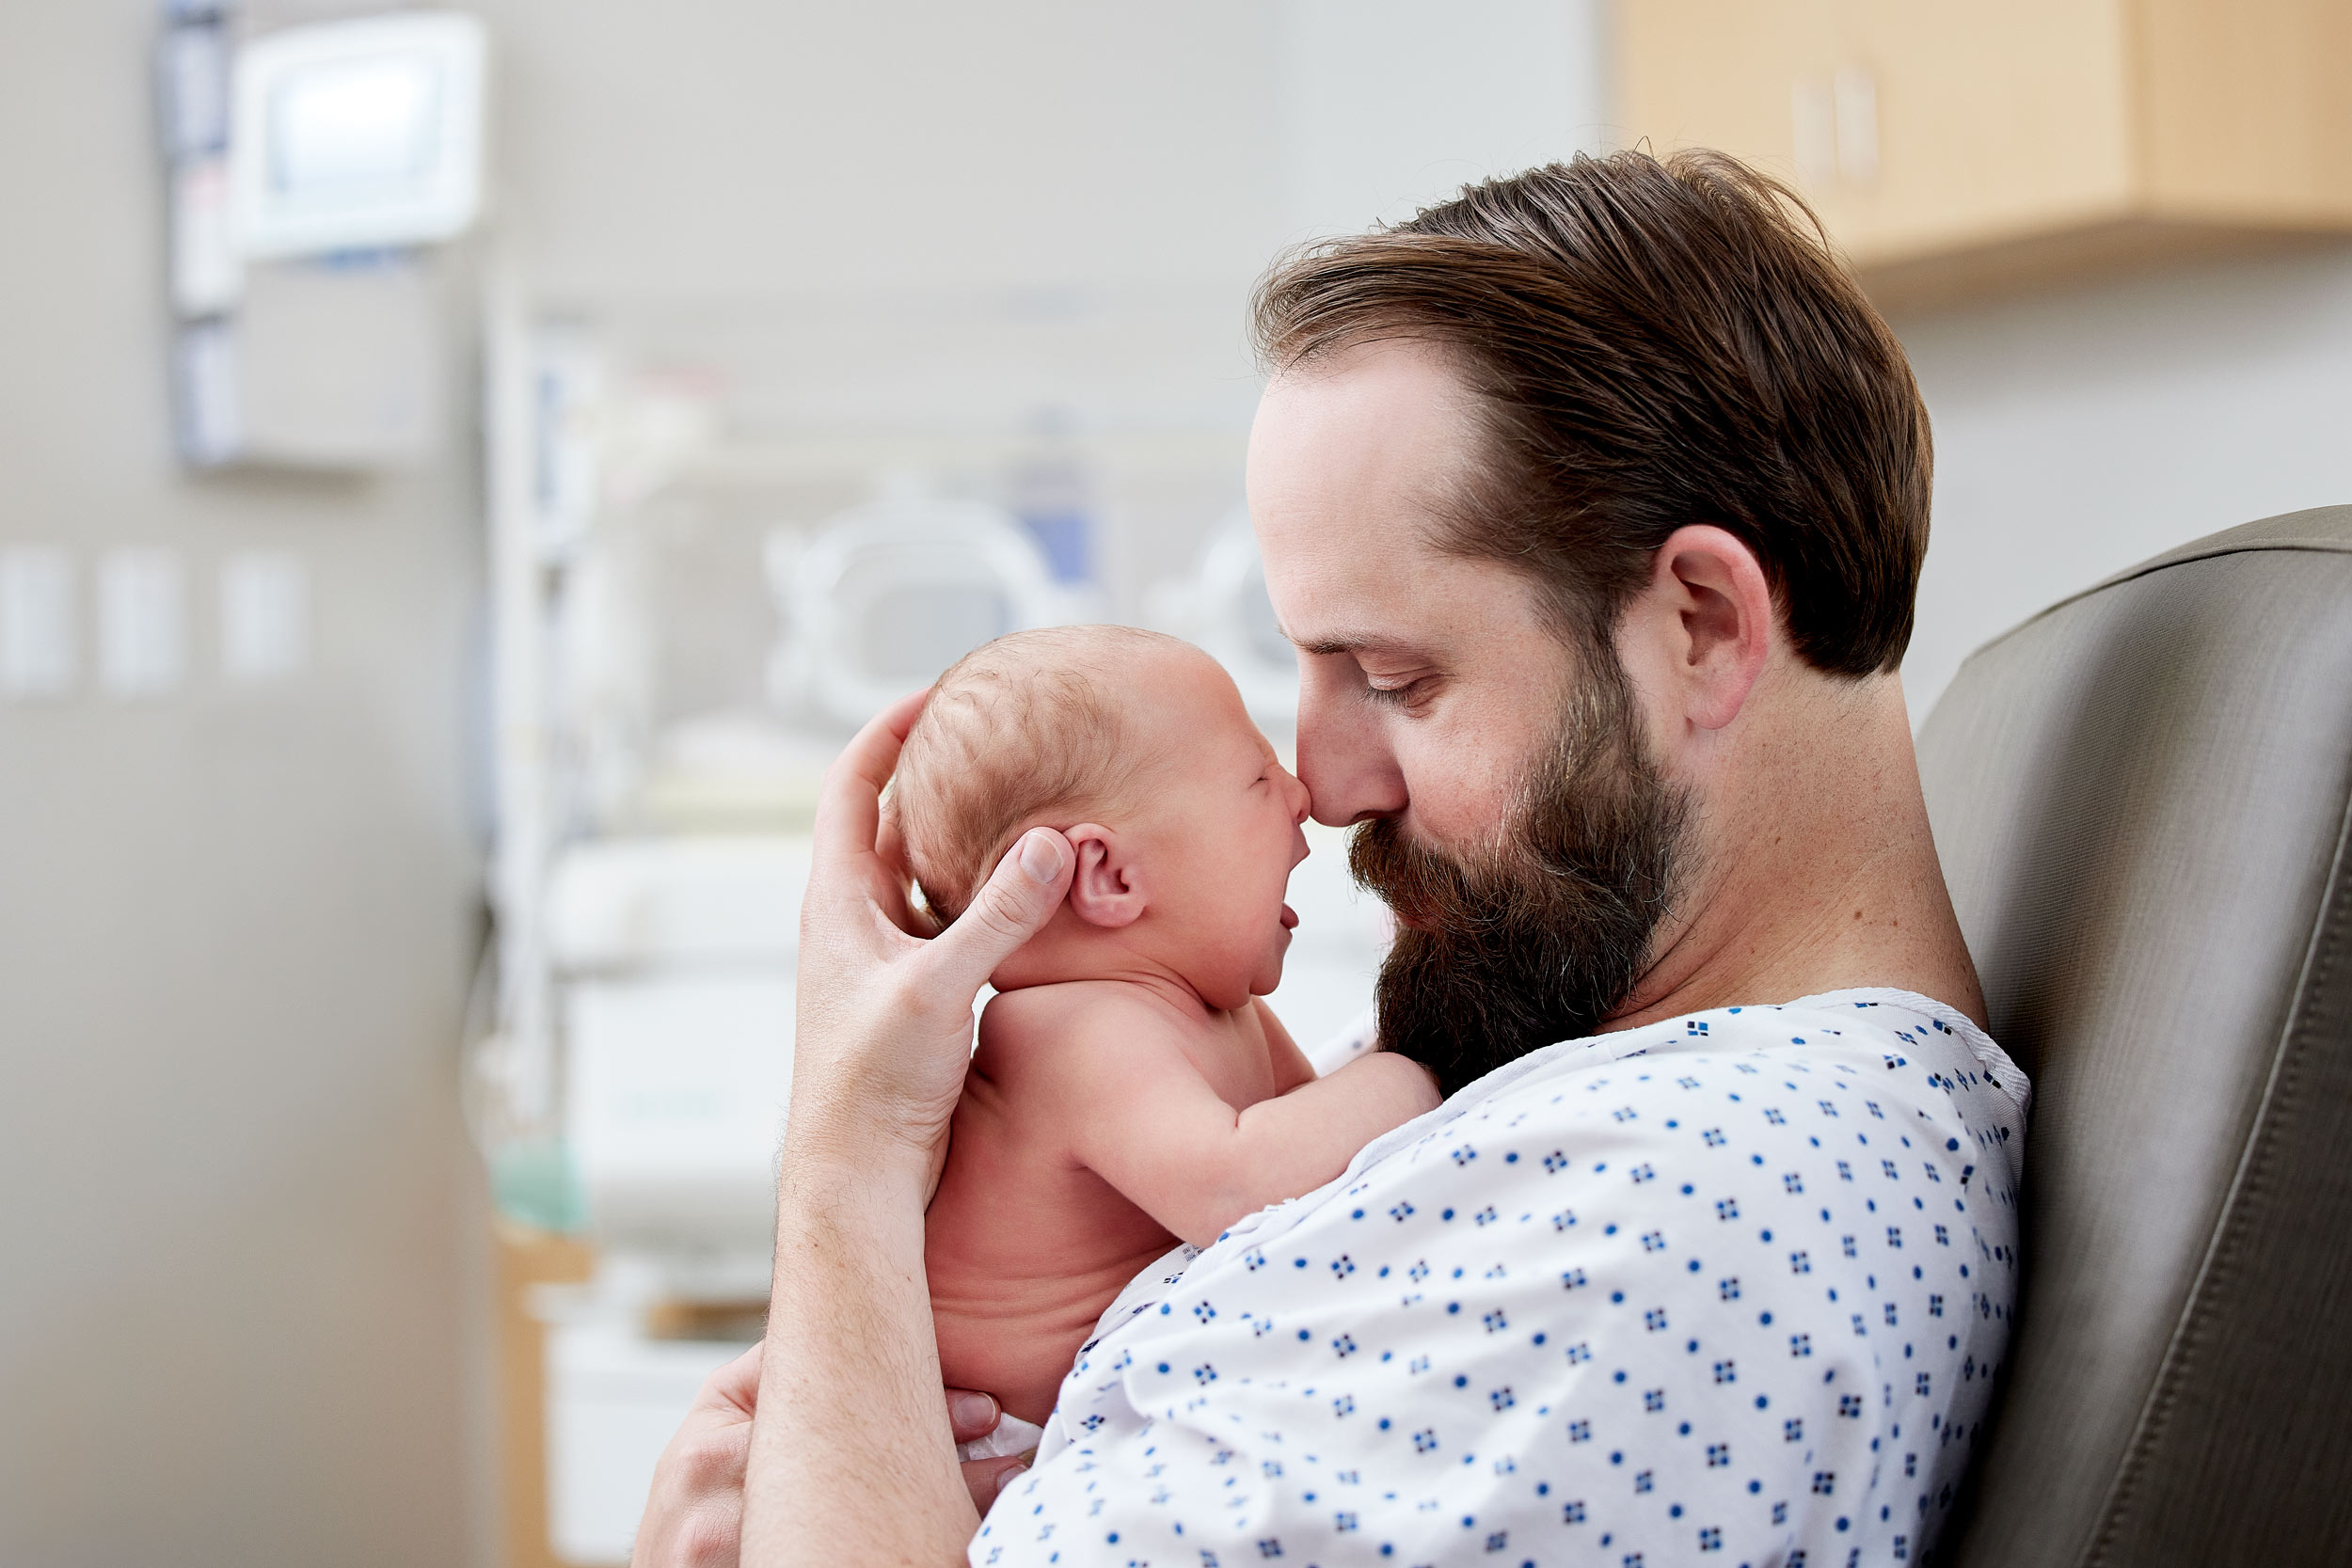 Indoor medical photograph of a new dad holding his newborn child in the hosptial.